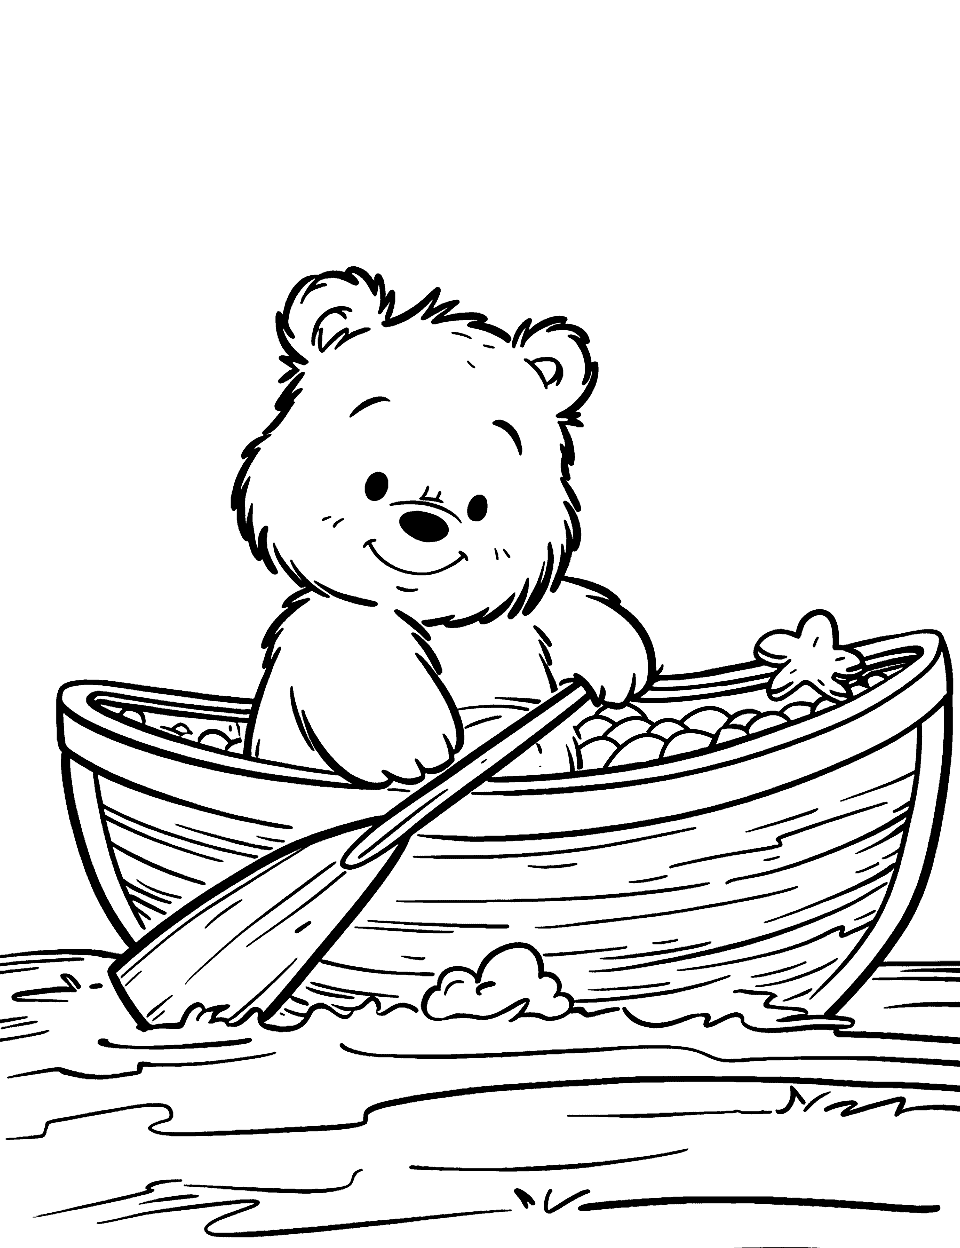 Teddy Bear in a Boat Coloring Page - A teddy bear rowing a small boat in a pond.